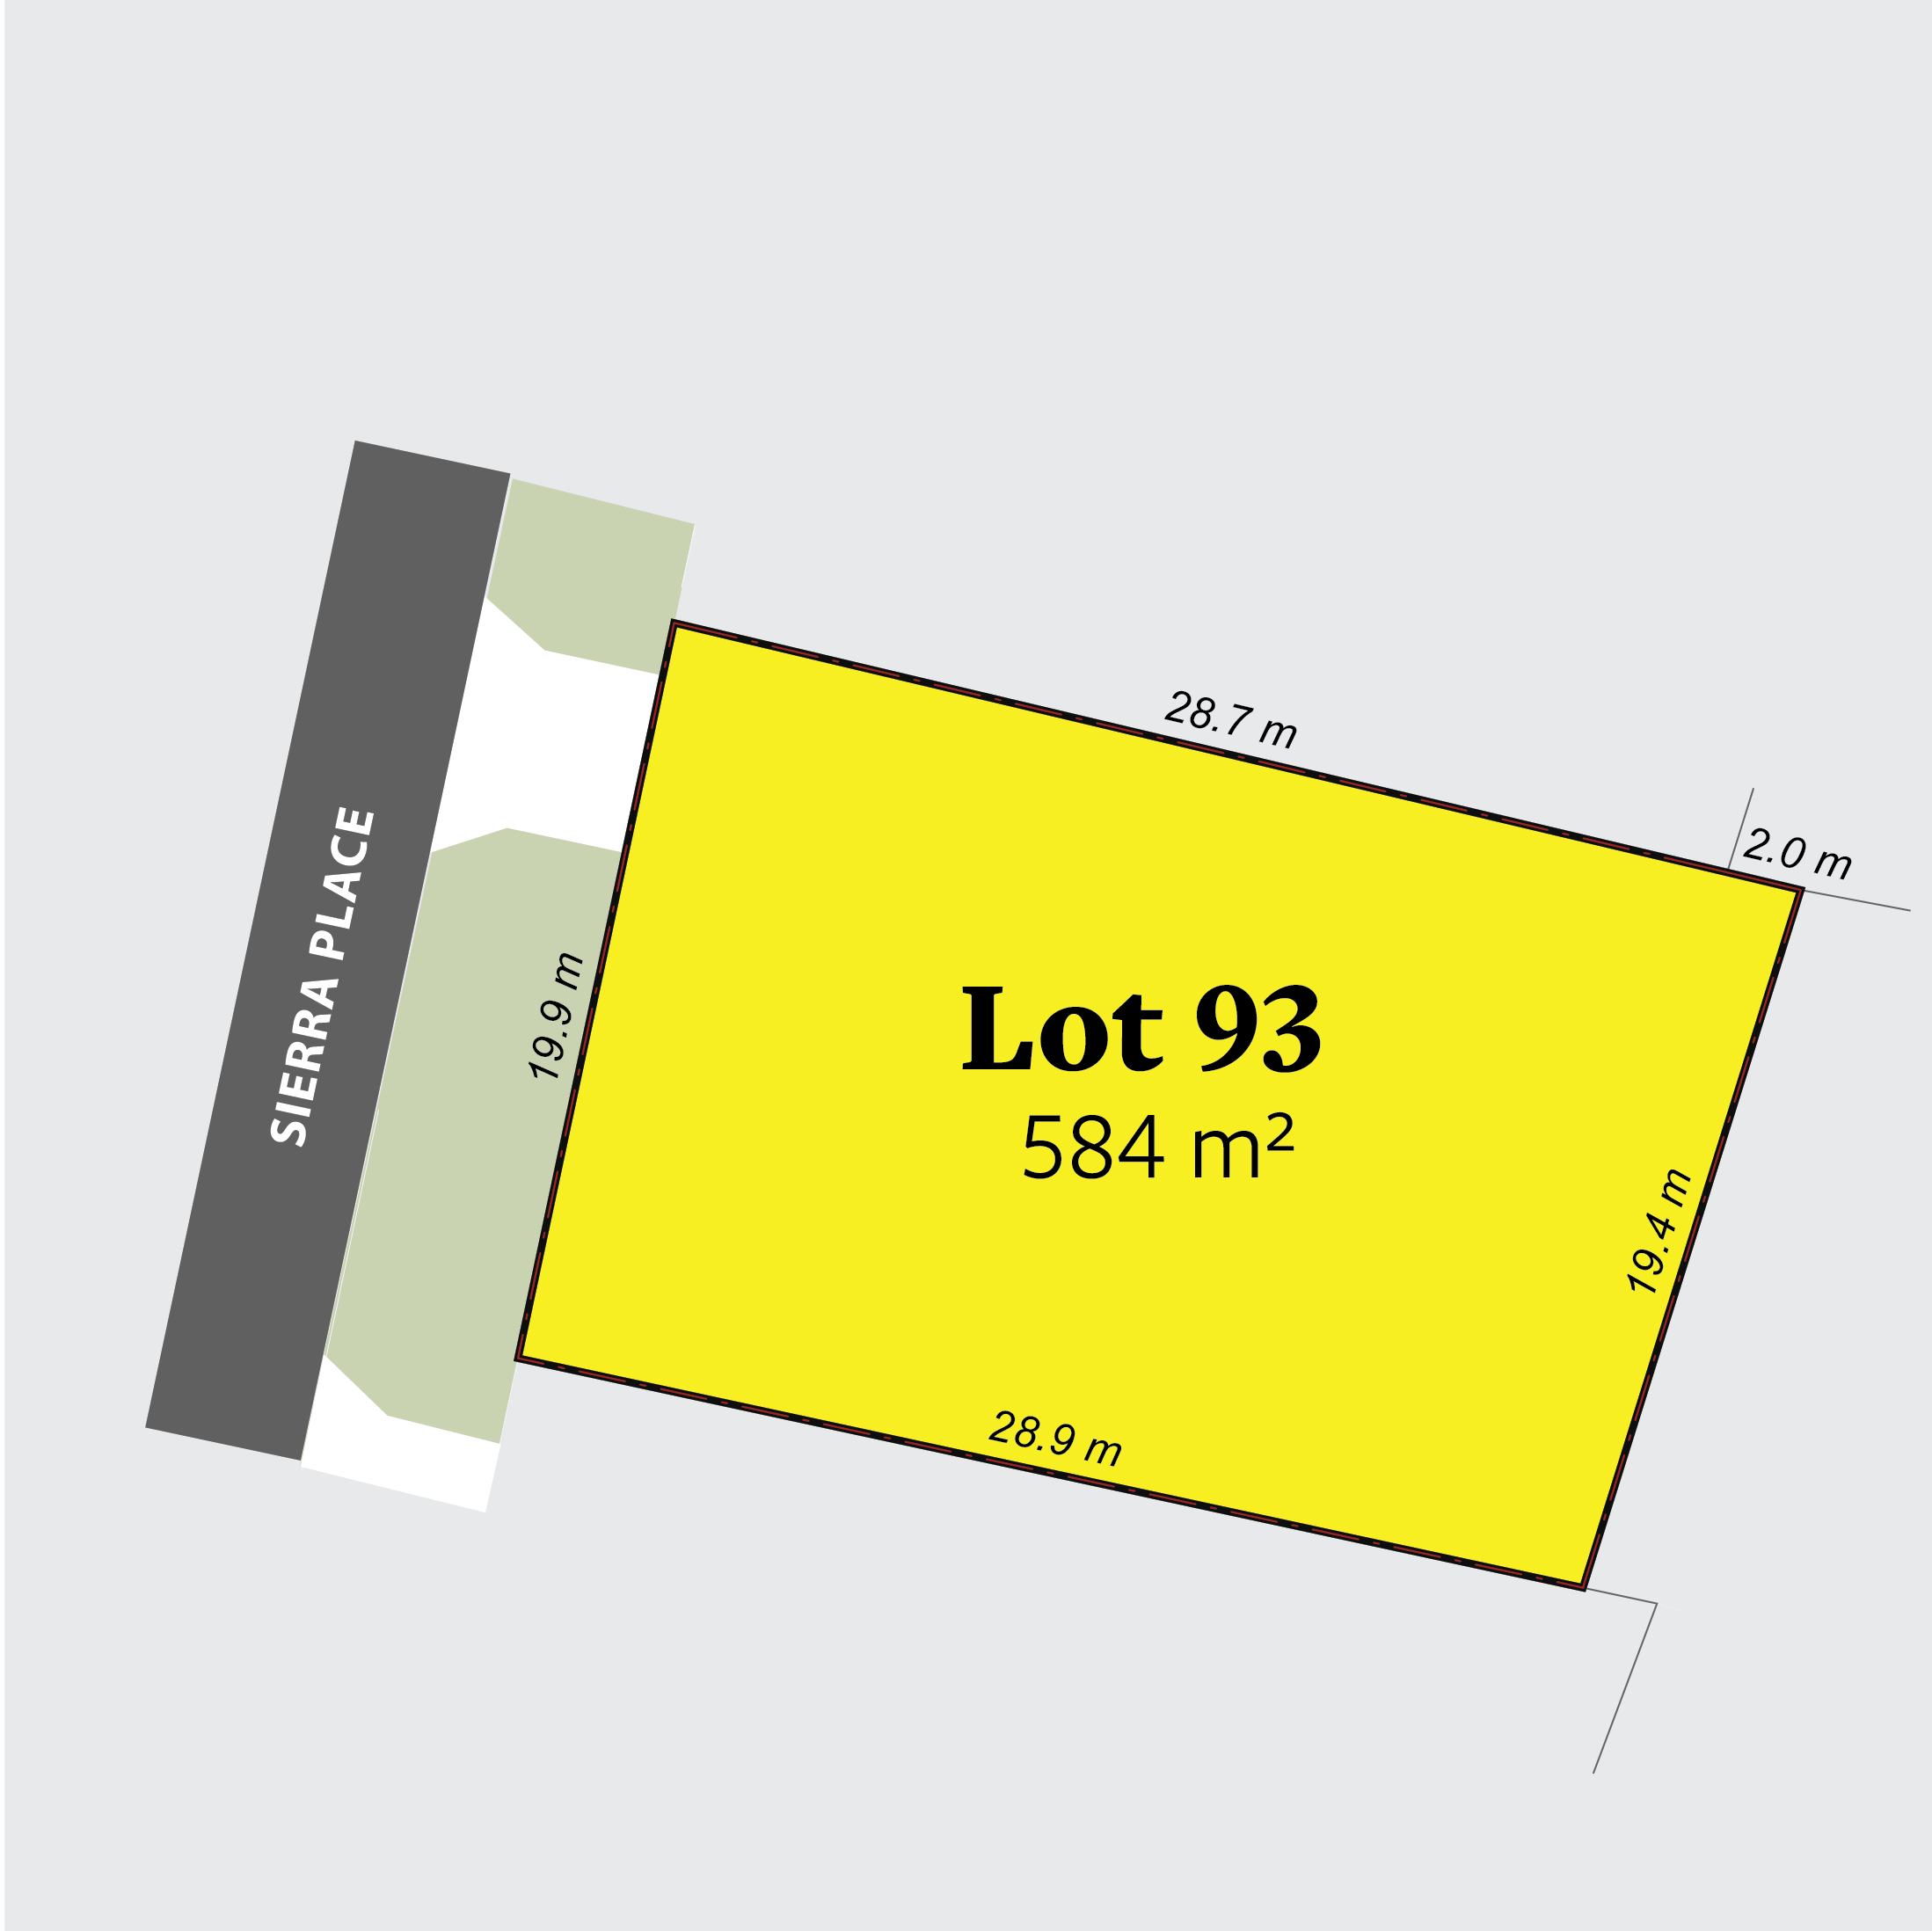 Image of Lot 93